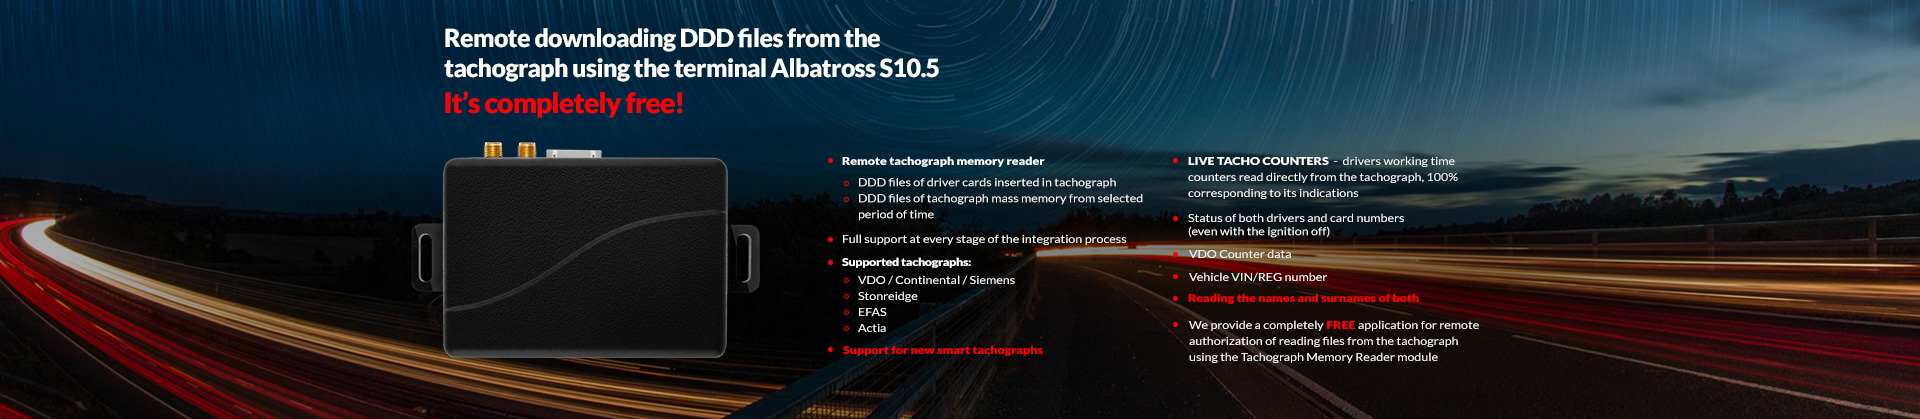 Remote downloading DDD files from the tachograph using the terminal Albatross S8.5 it’s completely free!